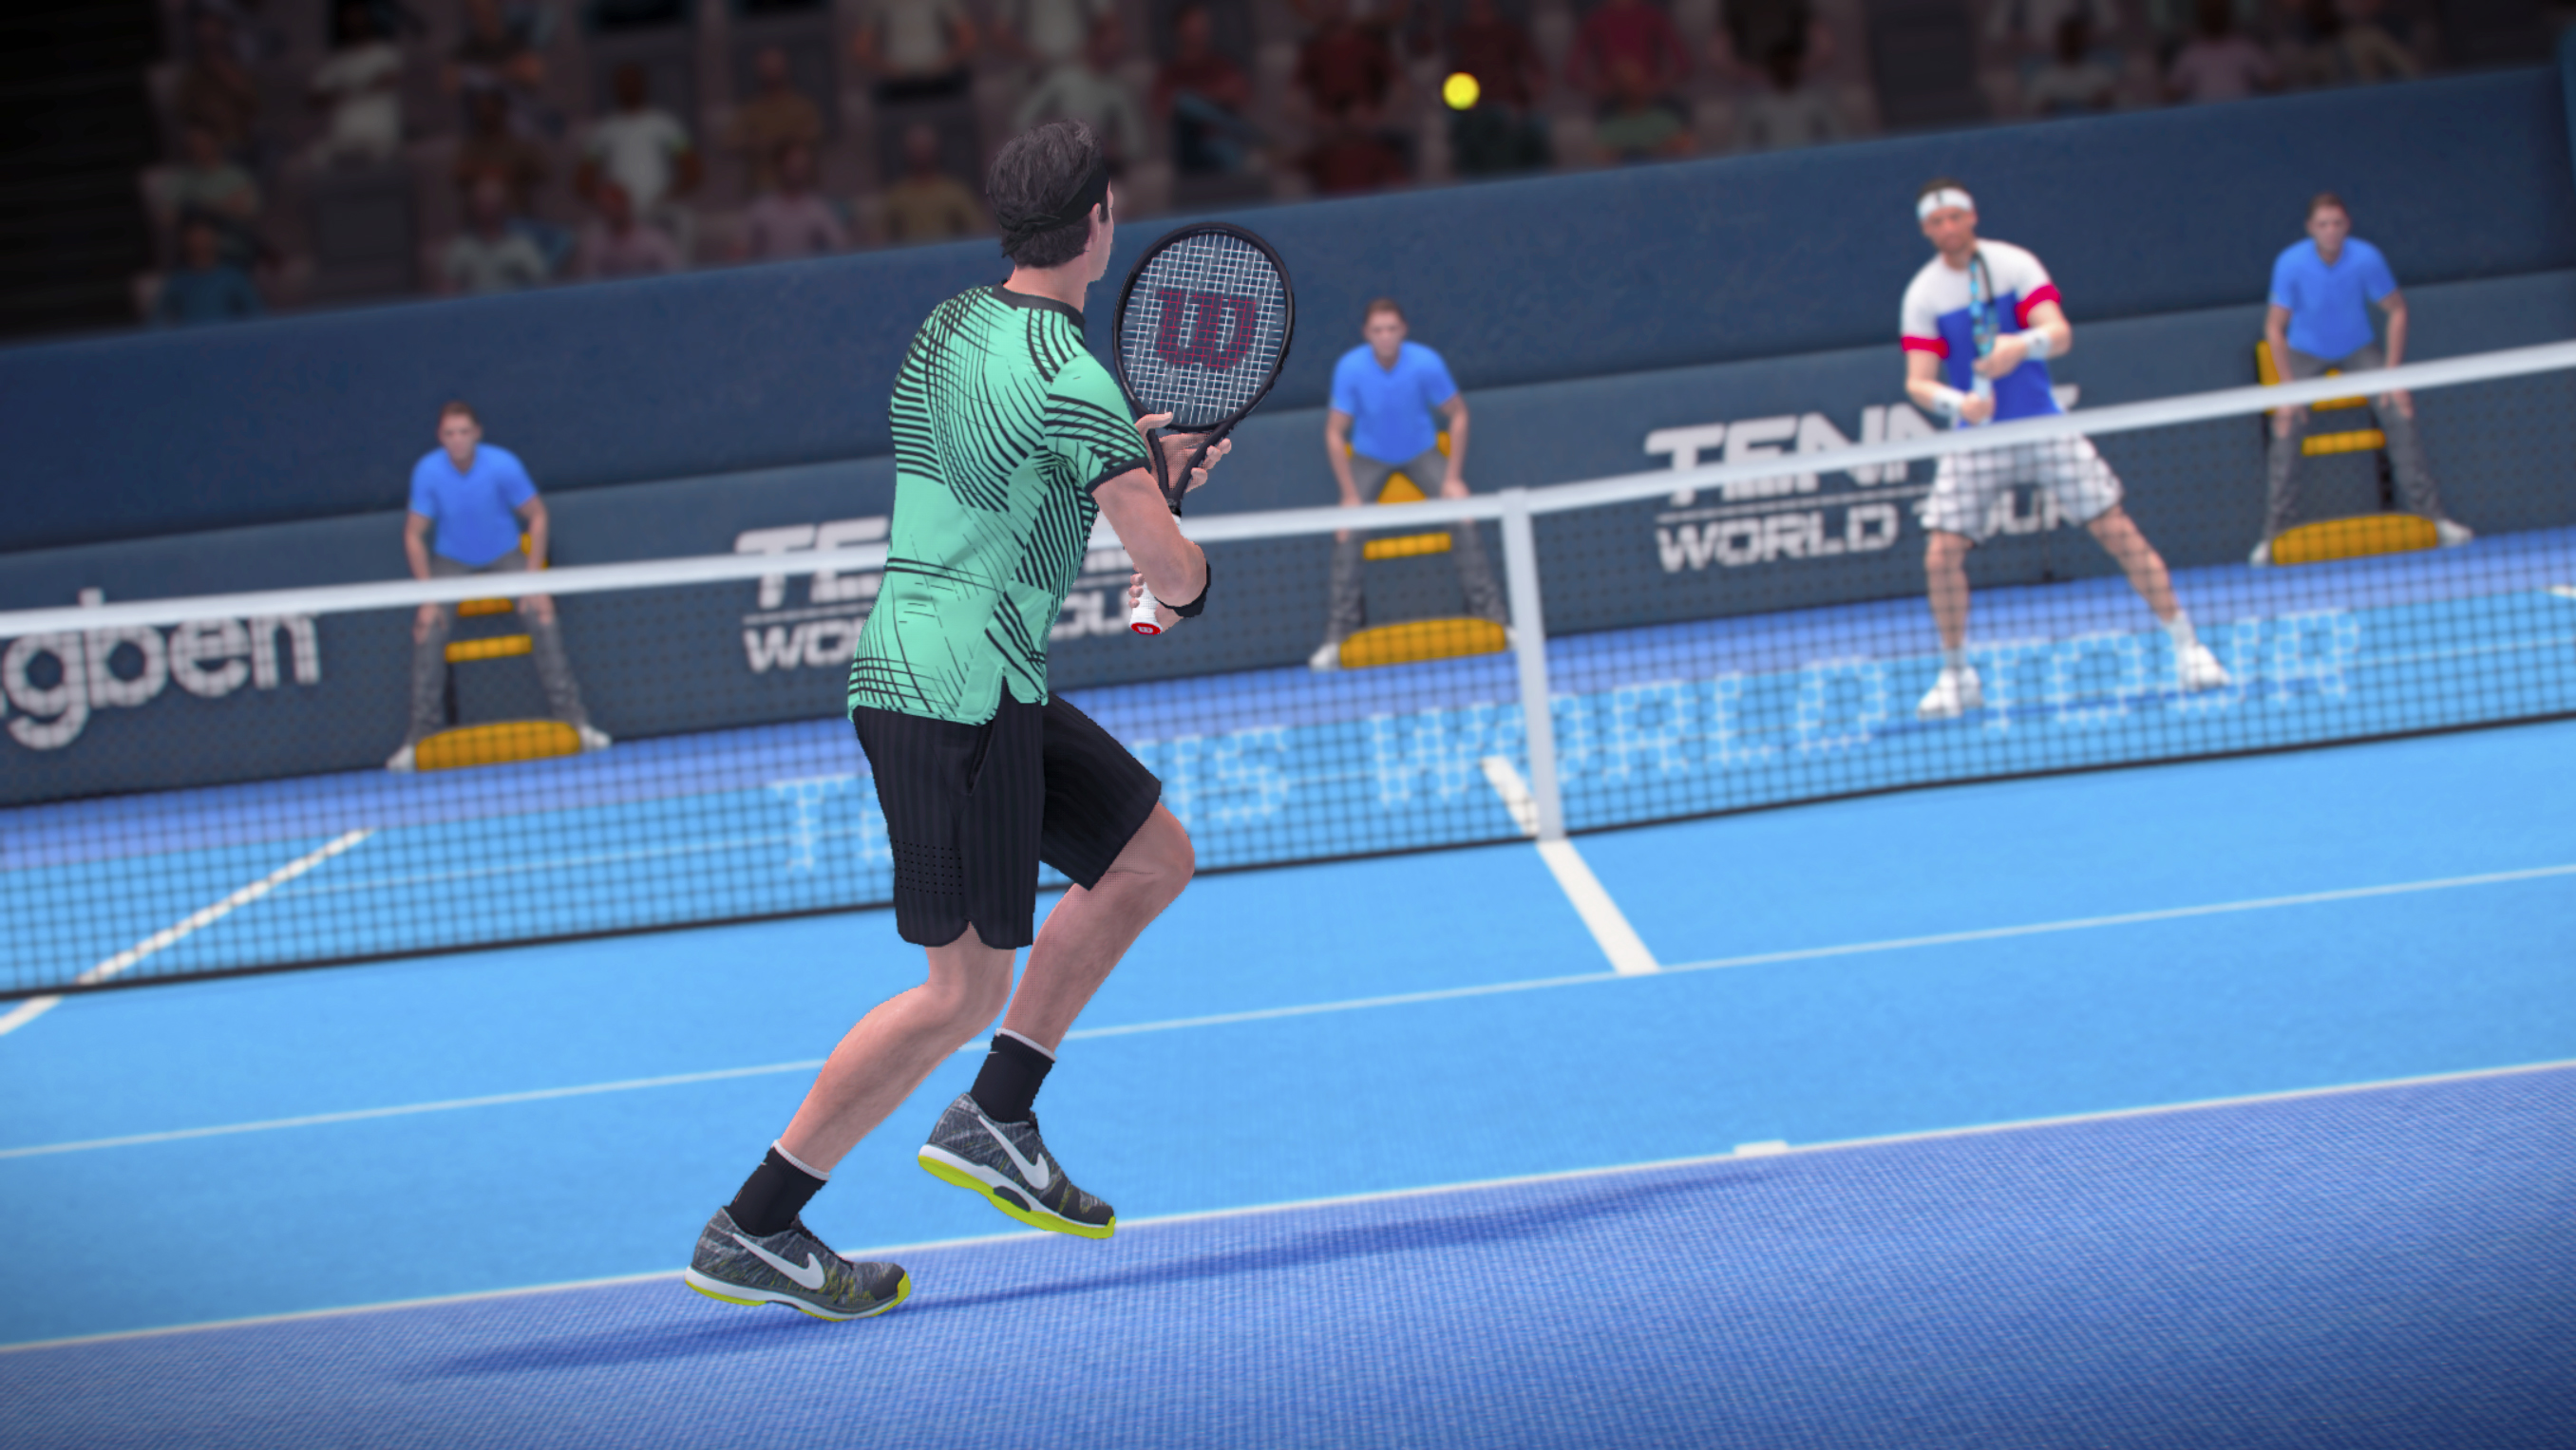 Tennis World Tour puts a top spin on the career mode - Polygon